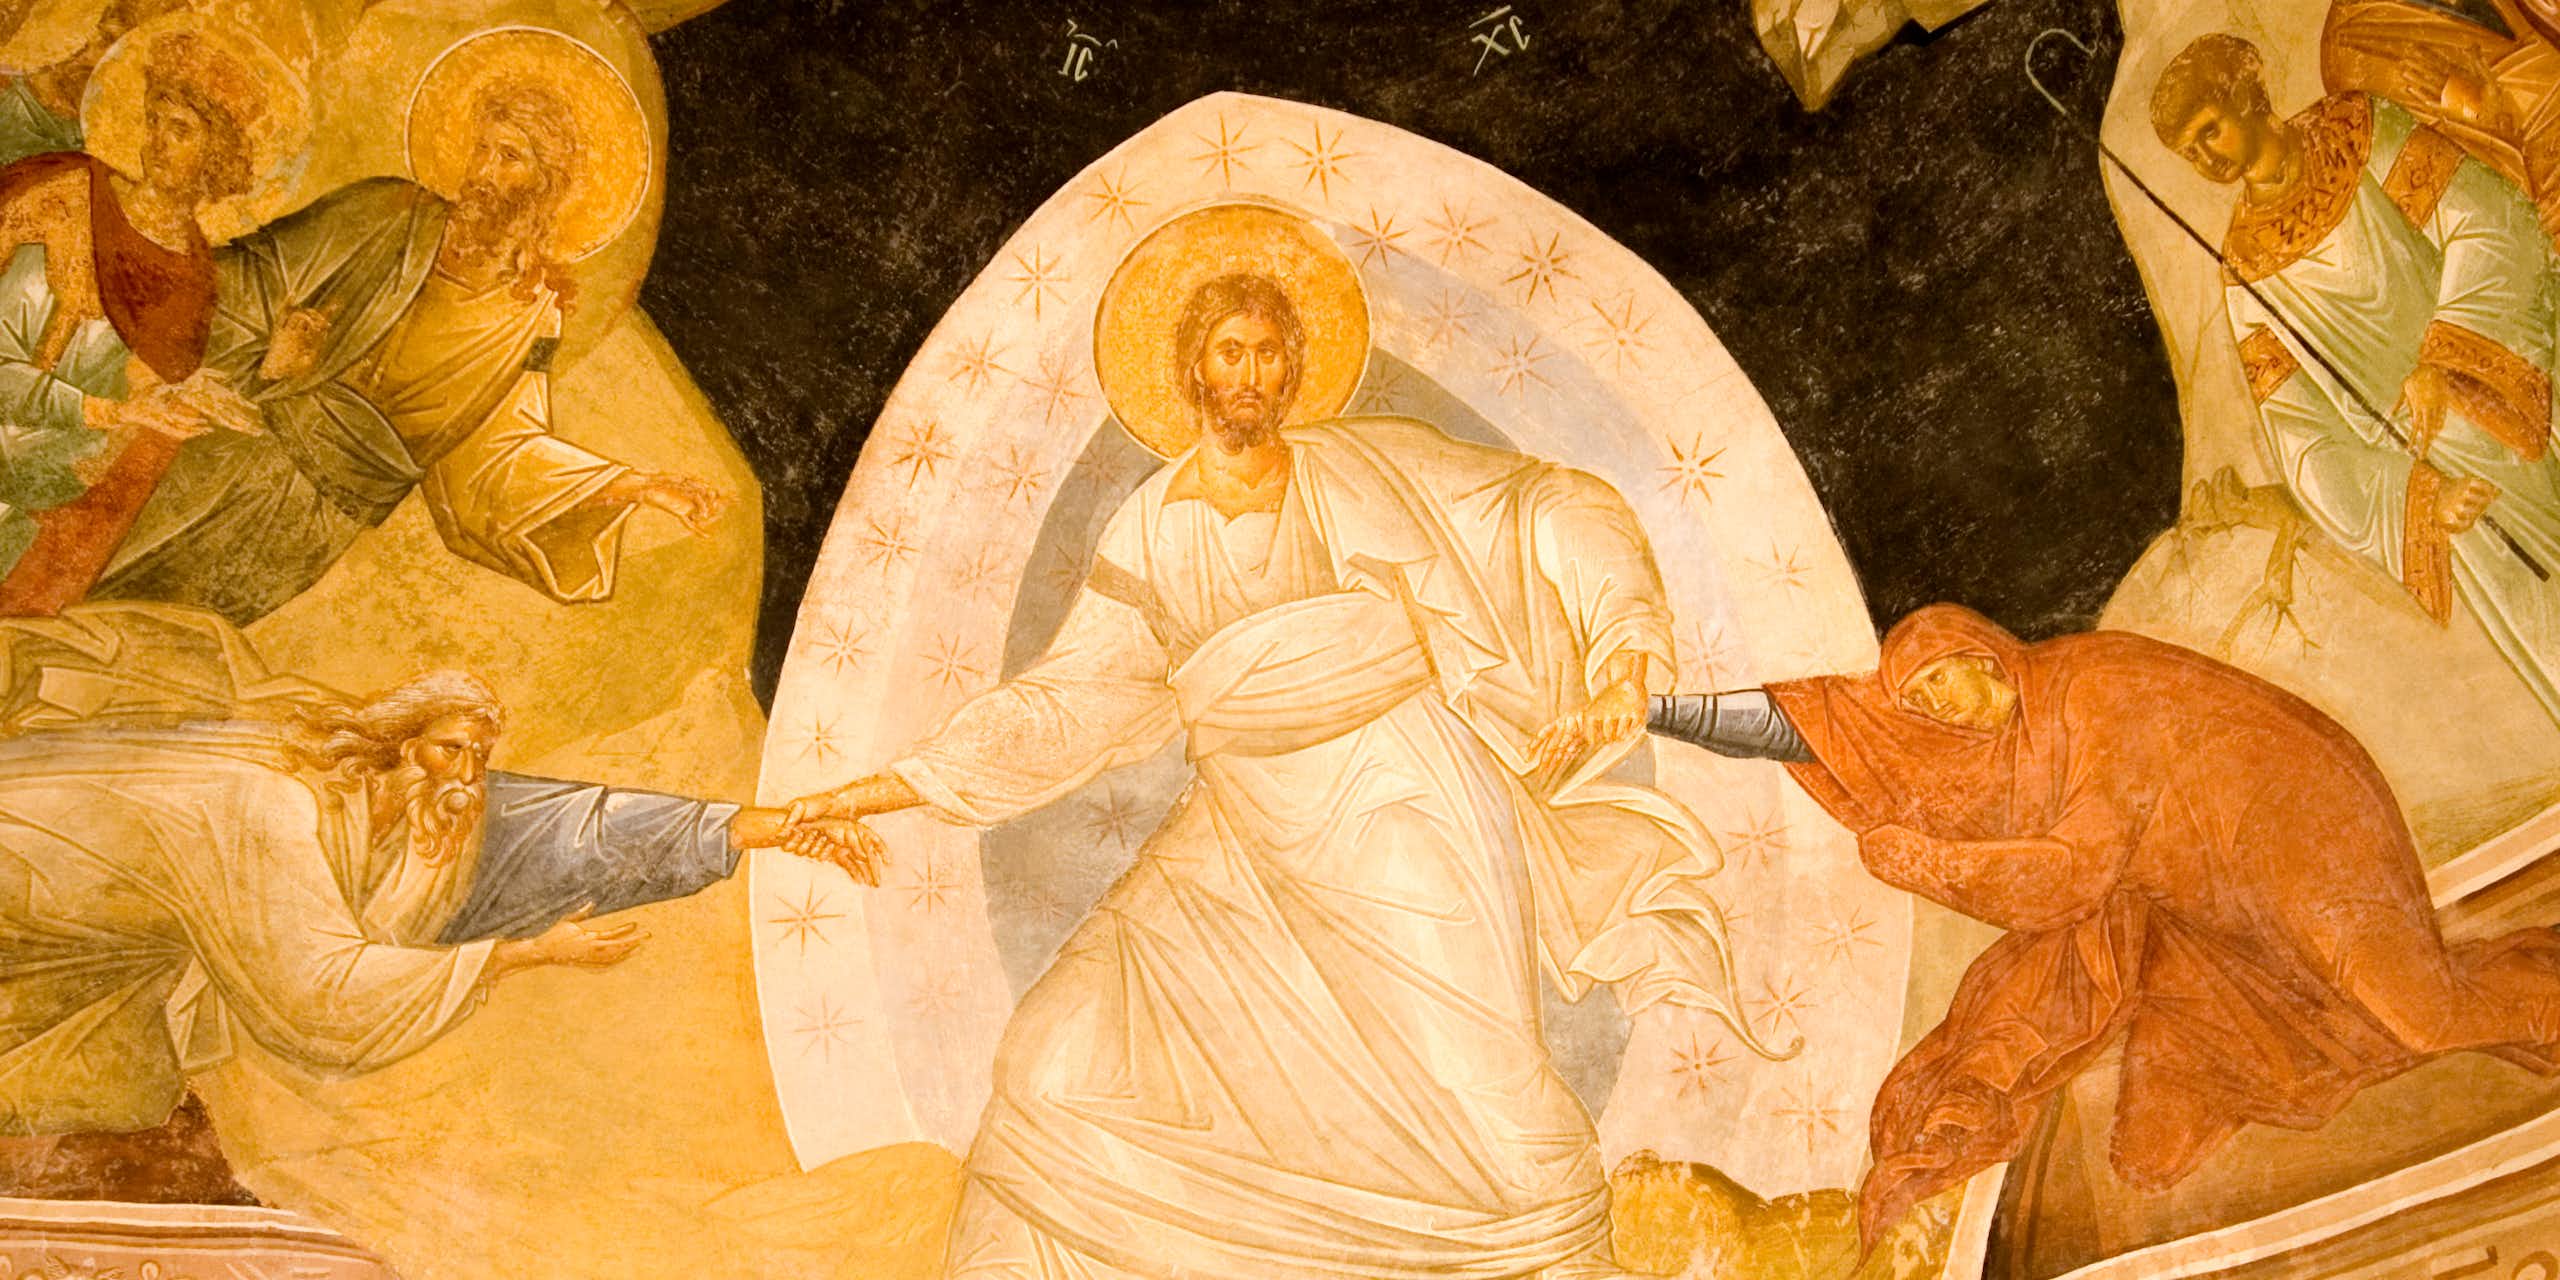 Christ with a halo and angels around him in a 14th century fresco, Chora Church, Istanbul ,Turkey.